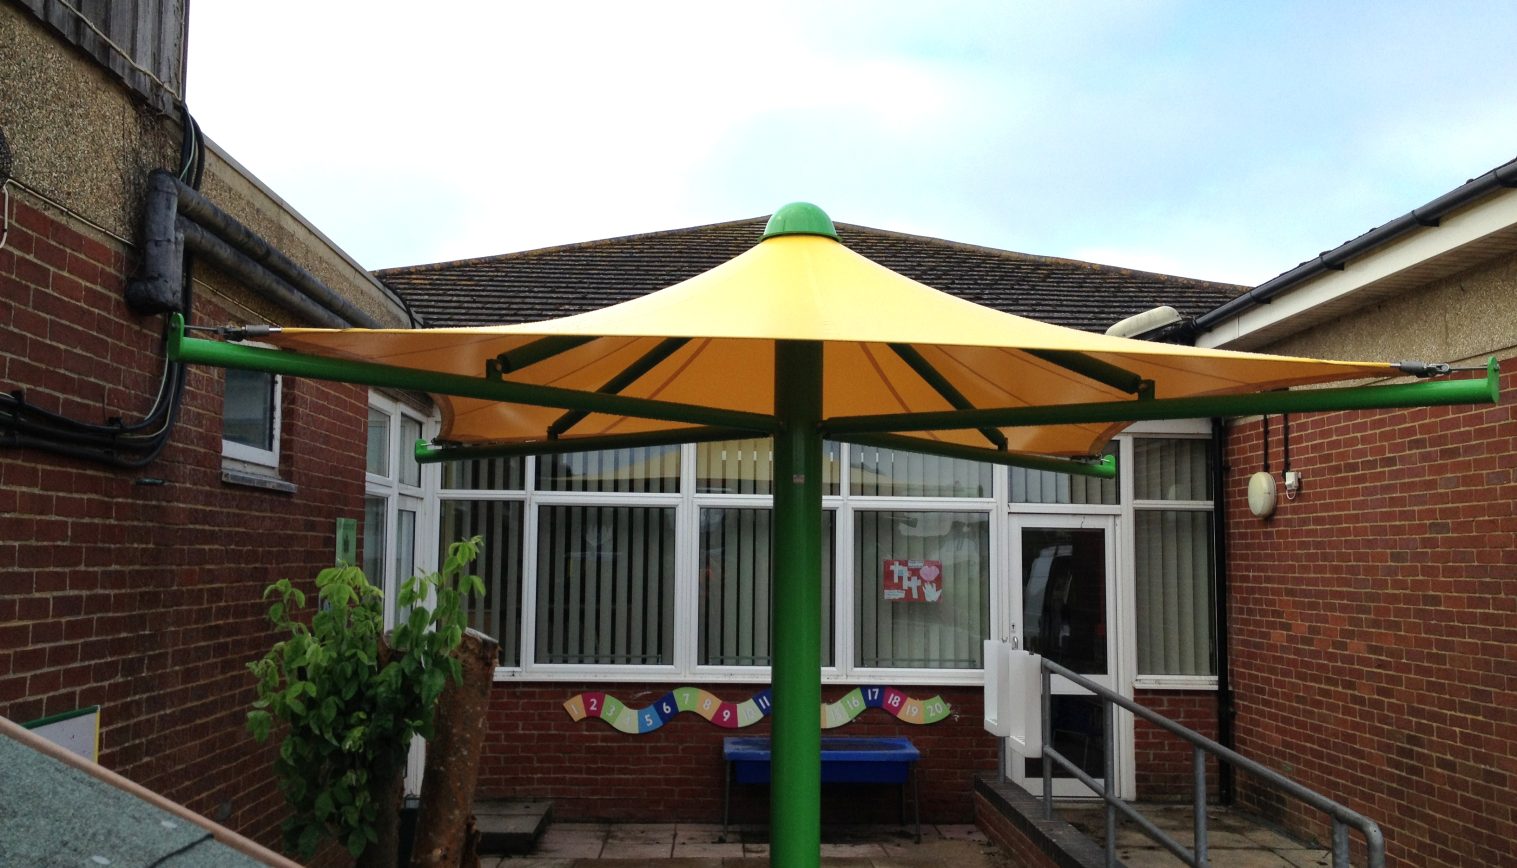 Bishop Tufnell CE Infant School – Second Tensile Umbrella Canopy